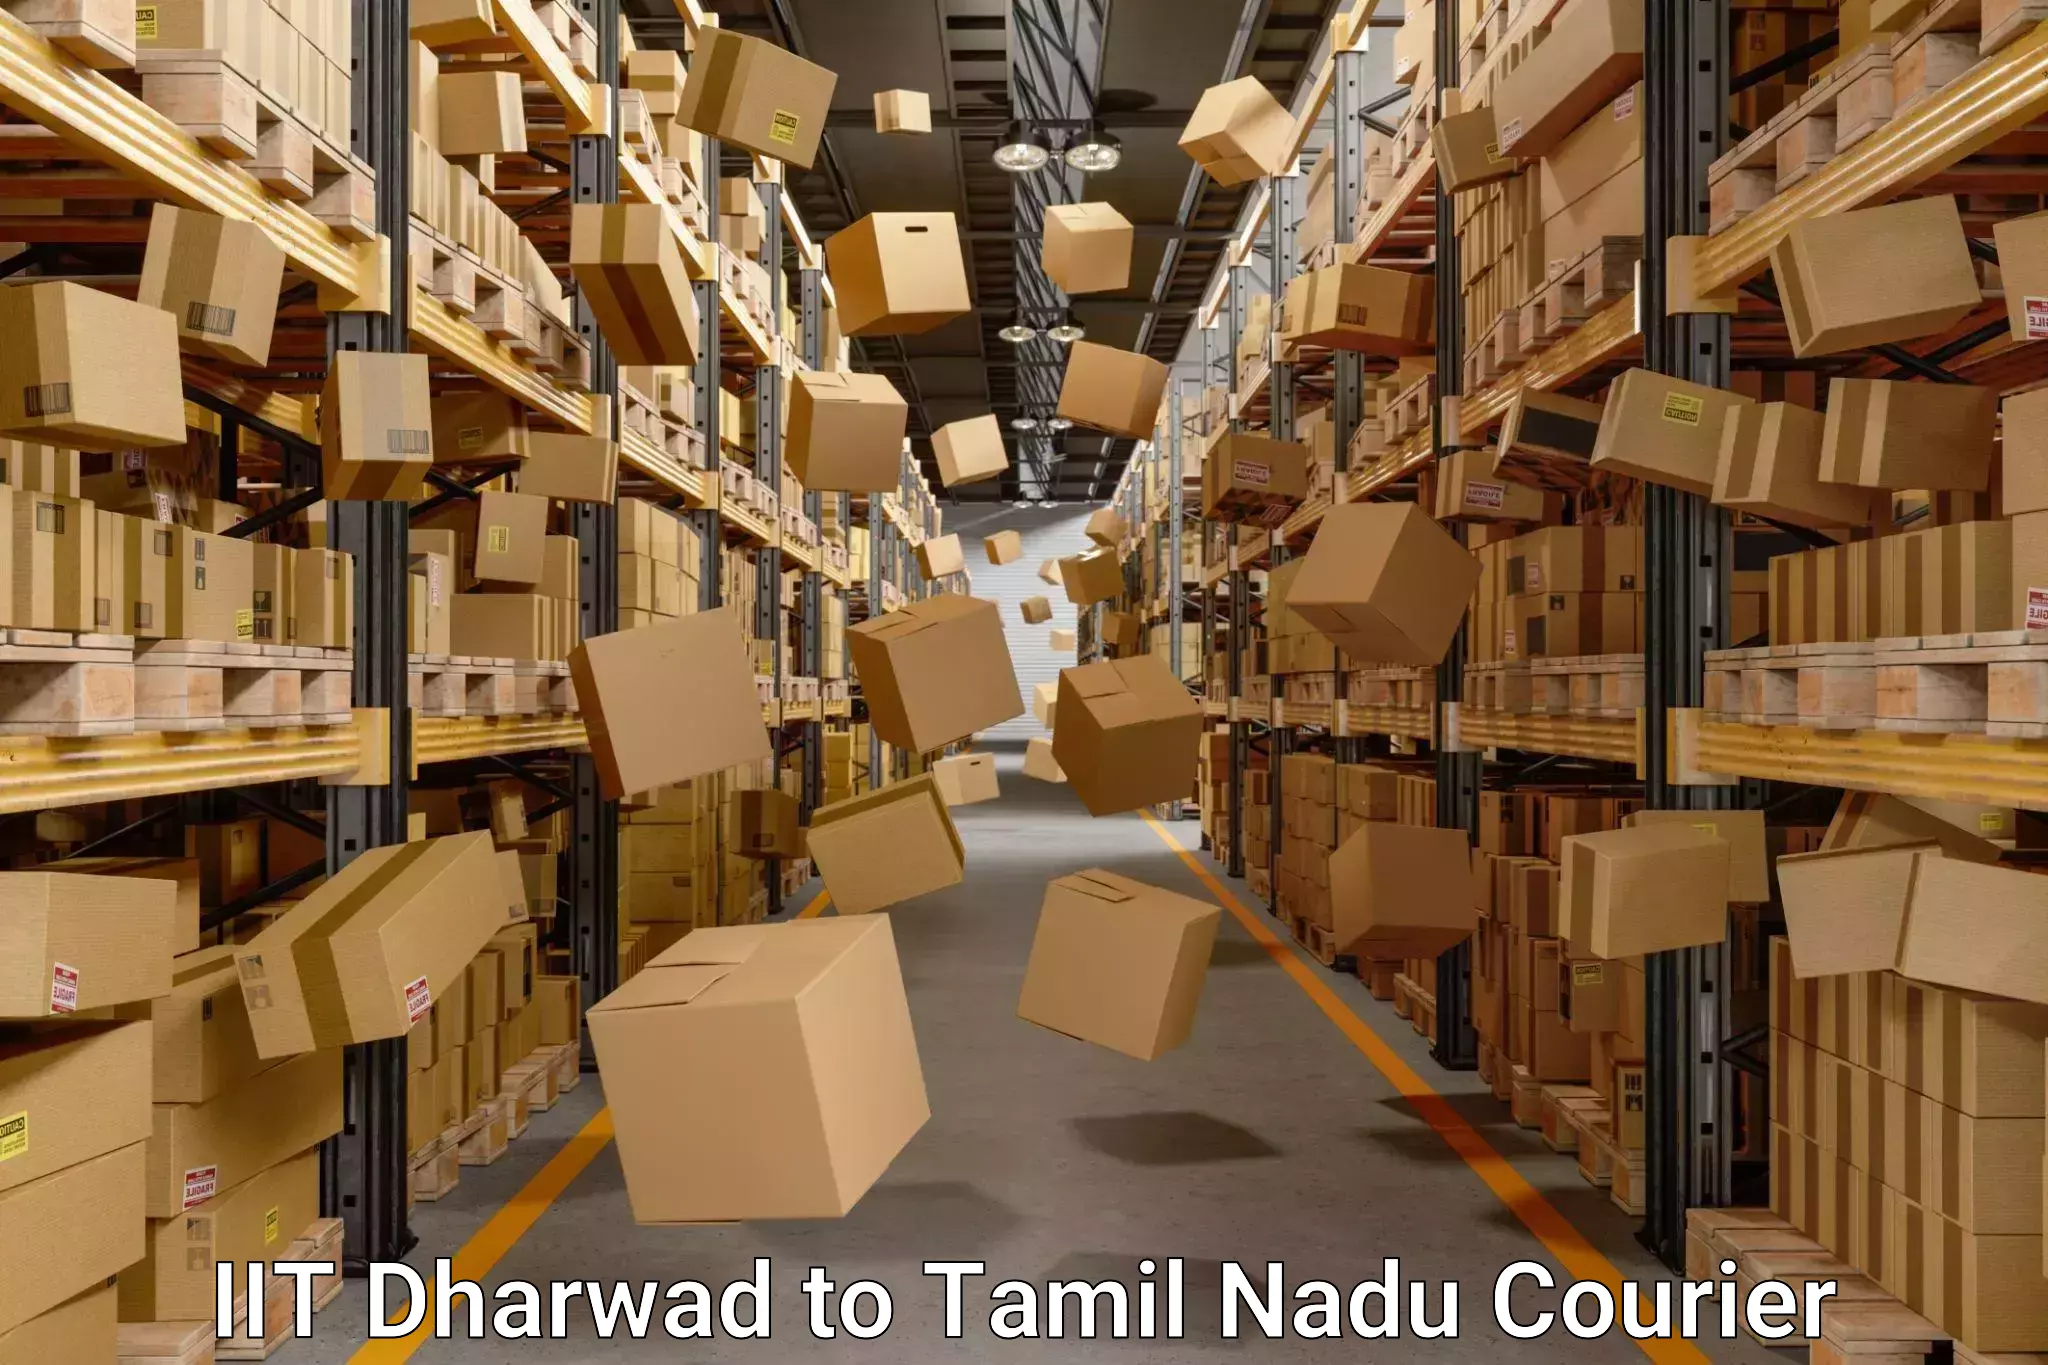 Furniture delivery service IIT Dharwad to Tamil Nadu